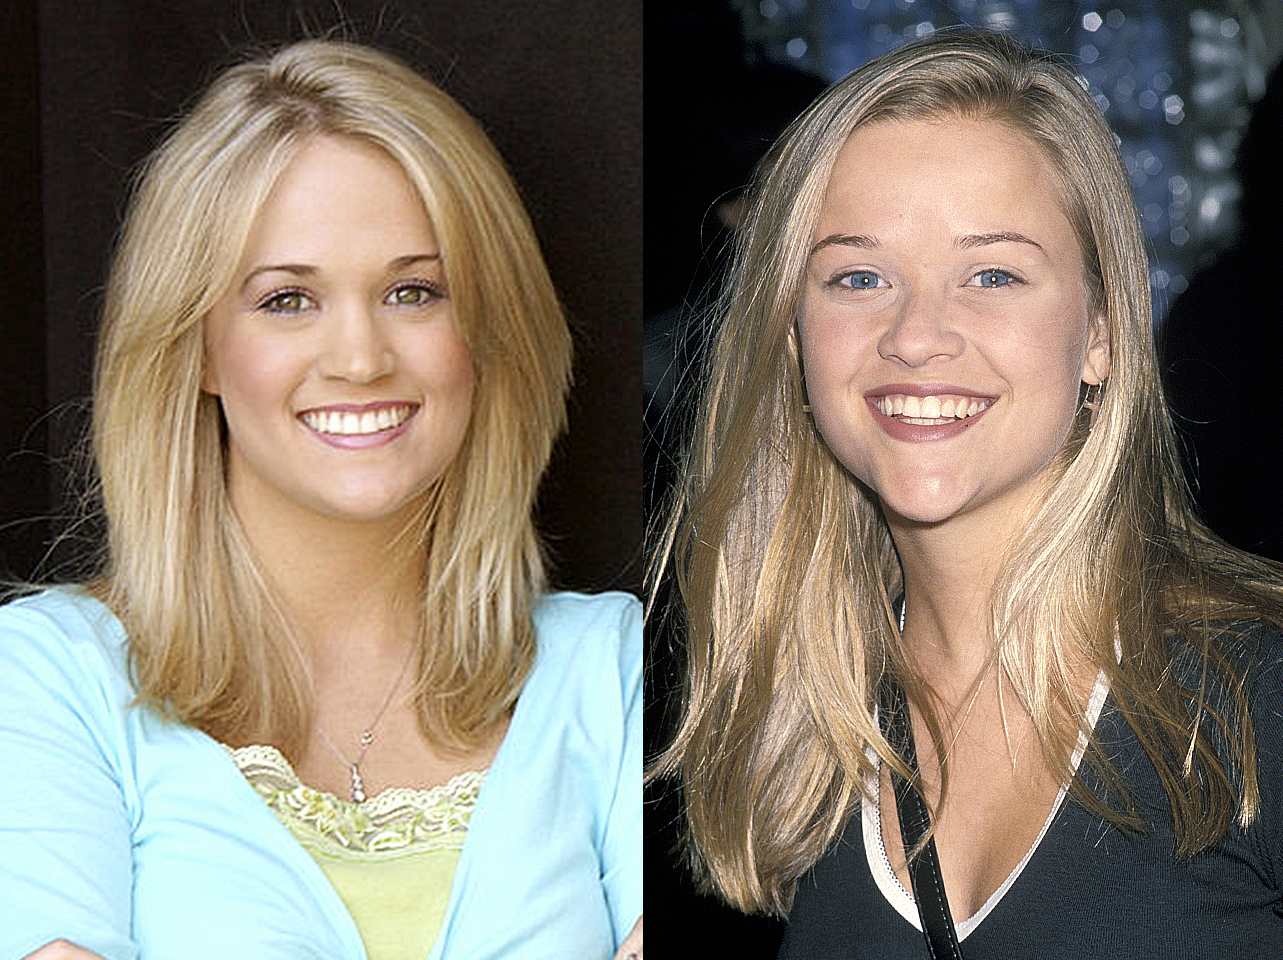 Reese Witherspoon und Carrie Underwood | Quelle: Getty Images